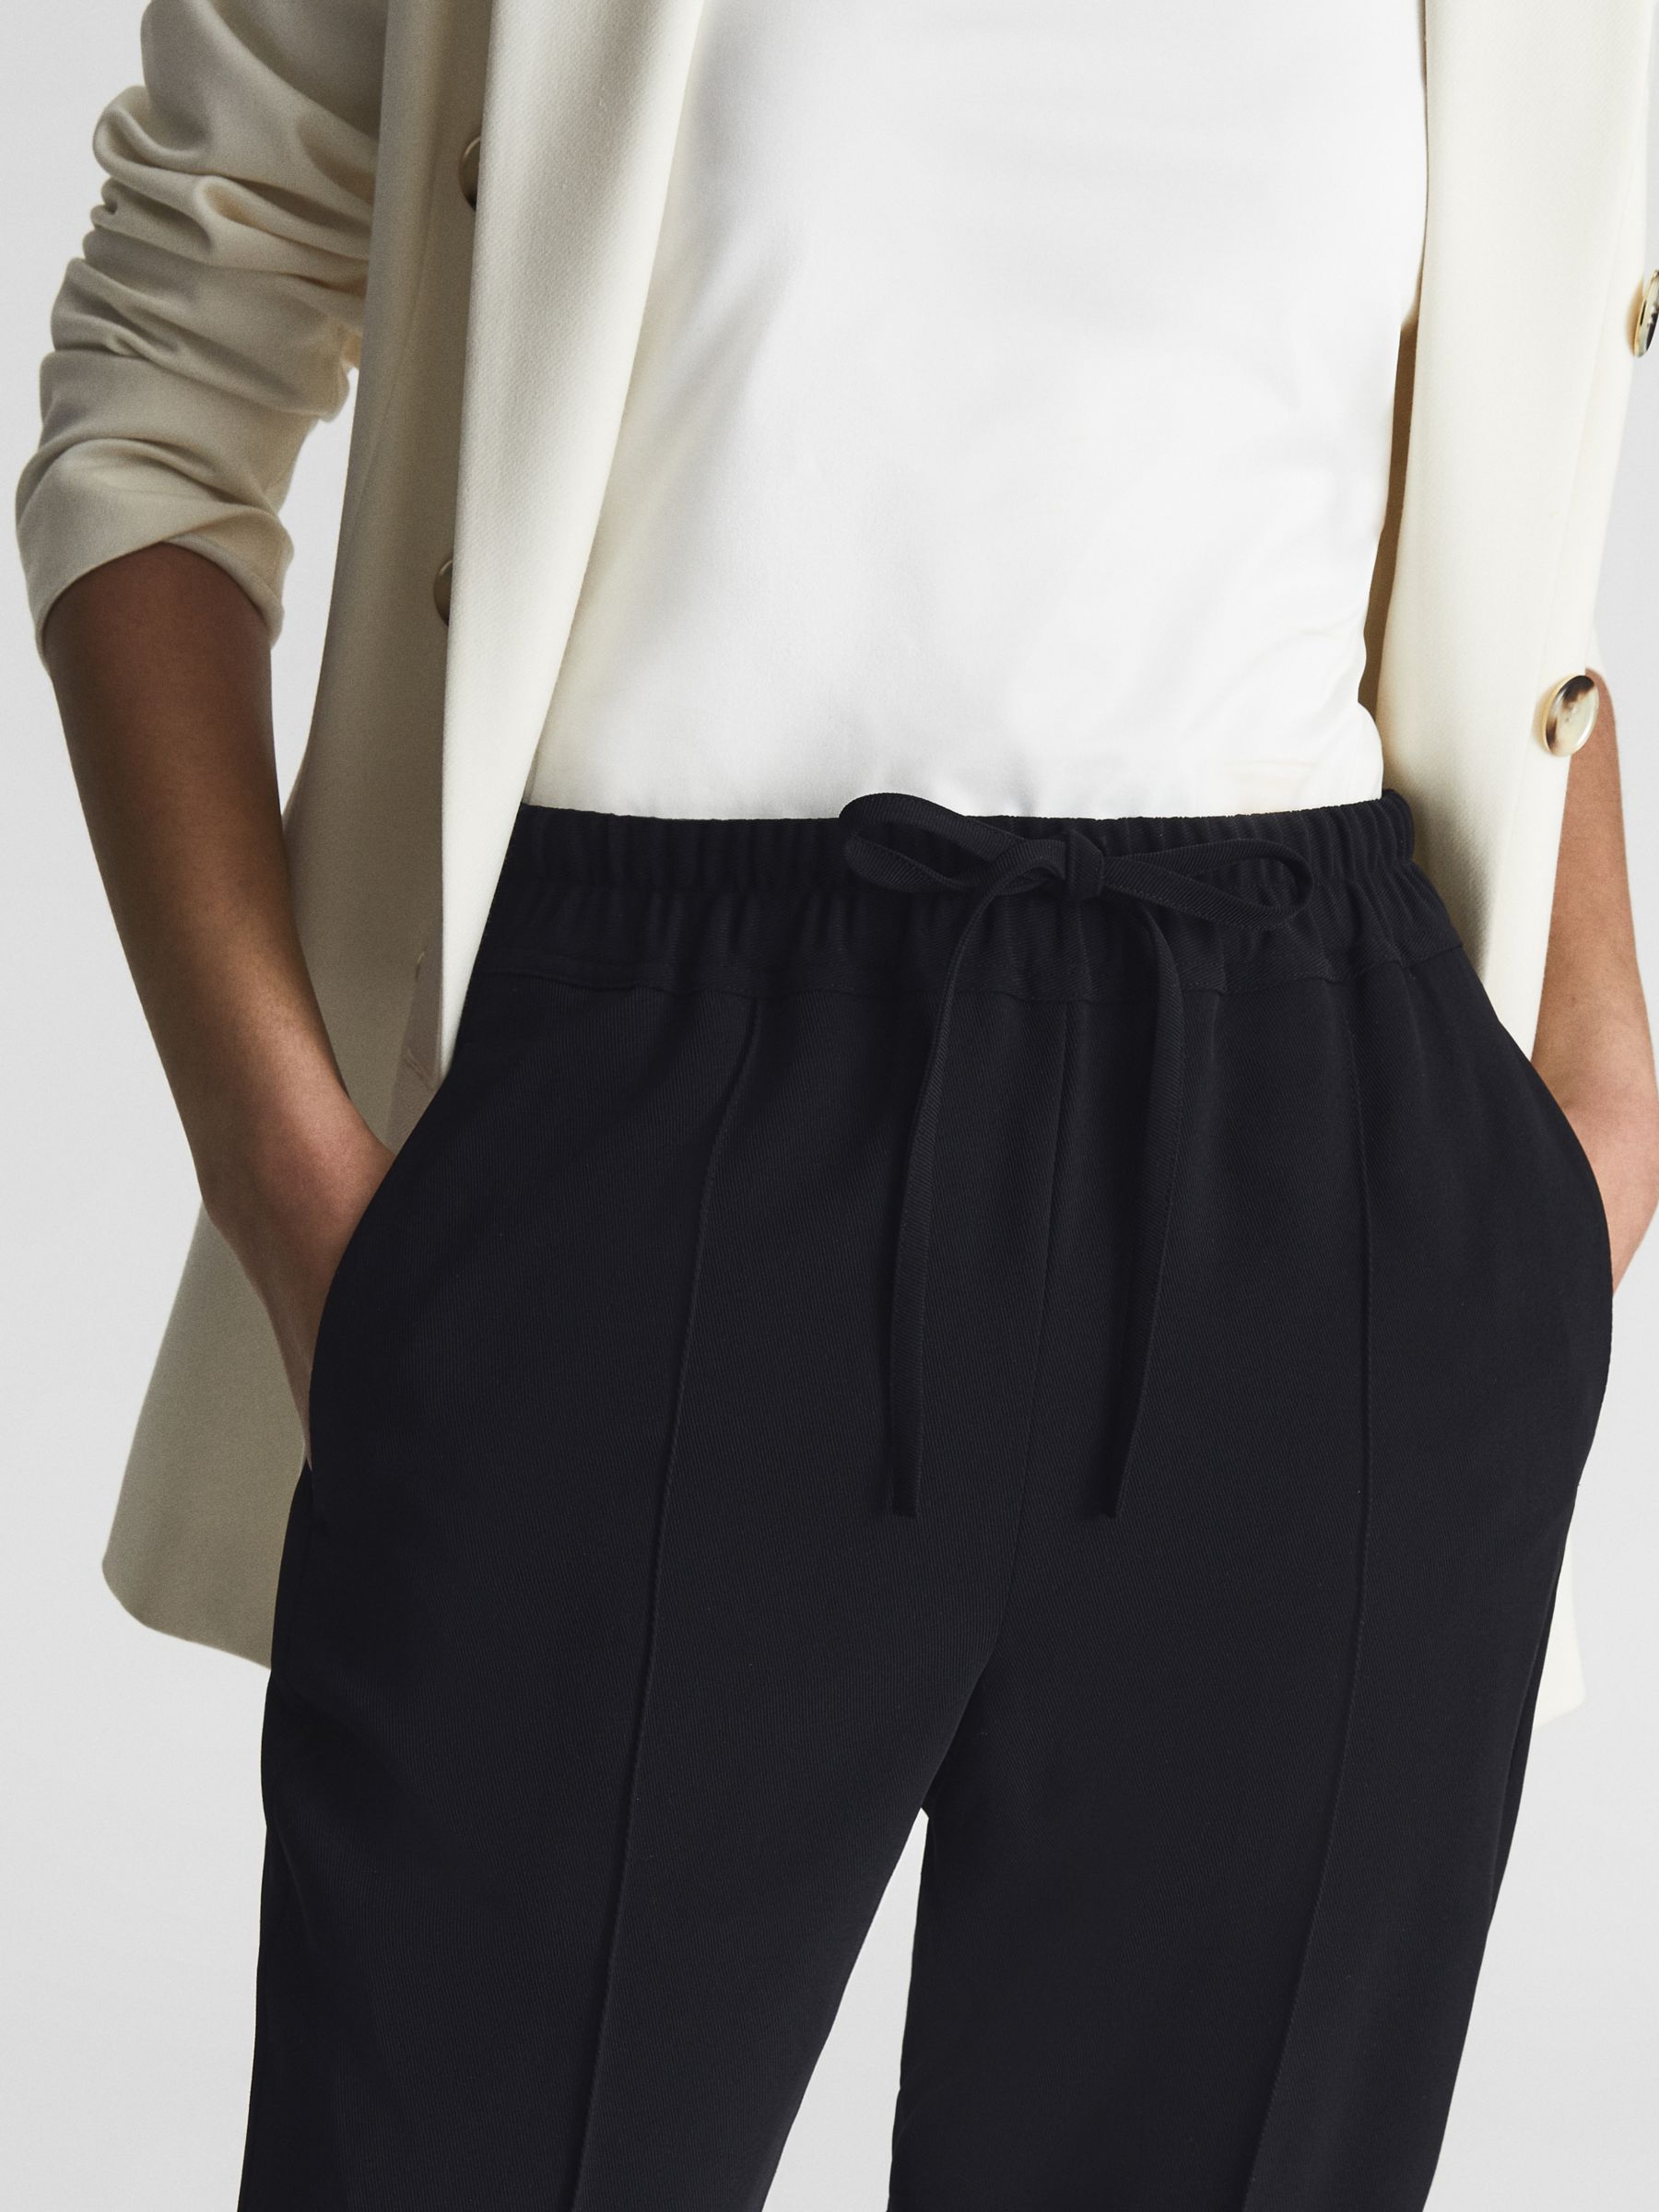 Buy Reiss Petite Hailey Cropped Trousers Online at johnlewis.com